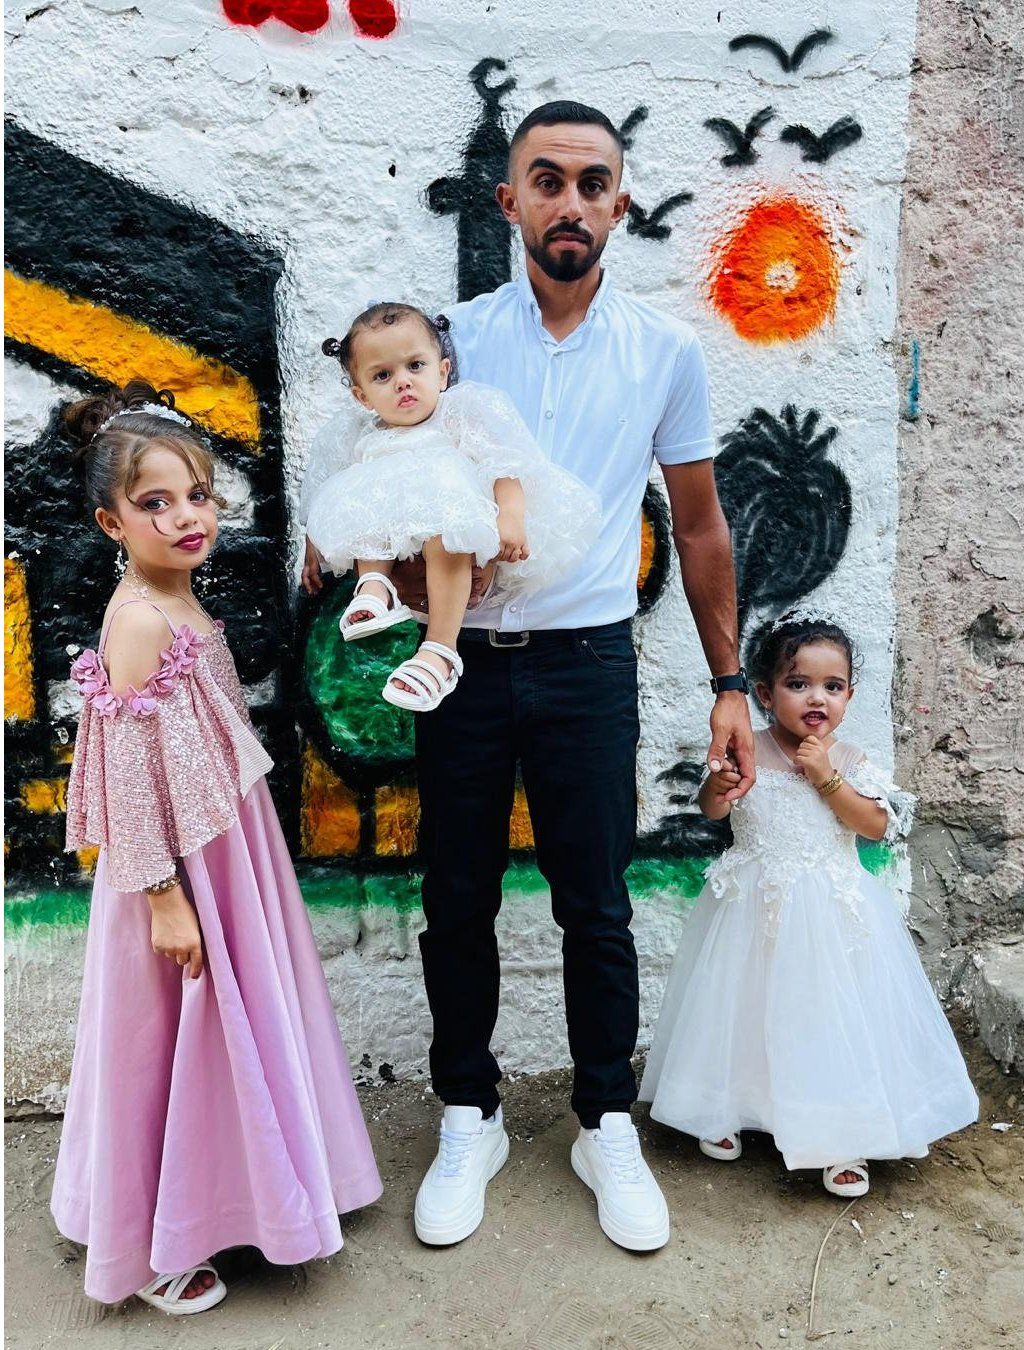 Ahmad and his daughters